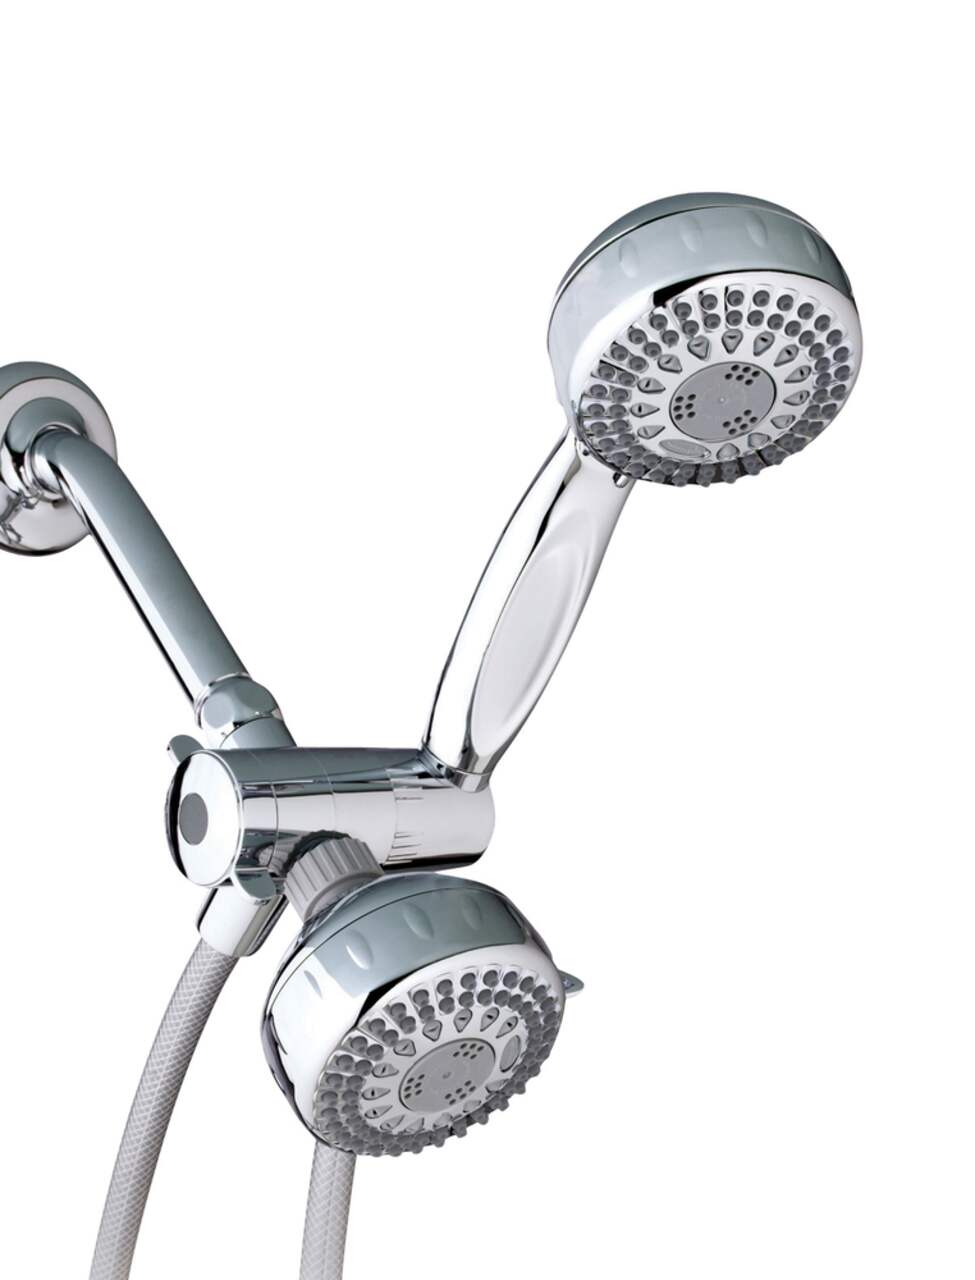 https://media-www.canadiantire.ca/product/fixing/plumbing/faucets-fixtures/0633420/waterpik-5-setting-chrome-shower-system-809ee71d-0121-491b-b899-10a1d2f1d4c7.png?imdensity=1&imwidth=640&impolicy=mZoom